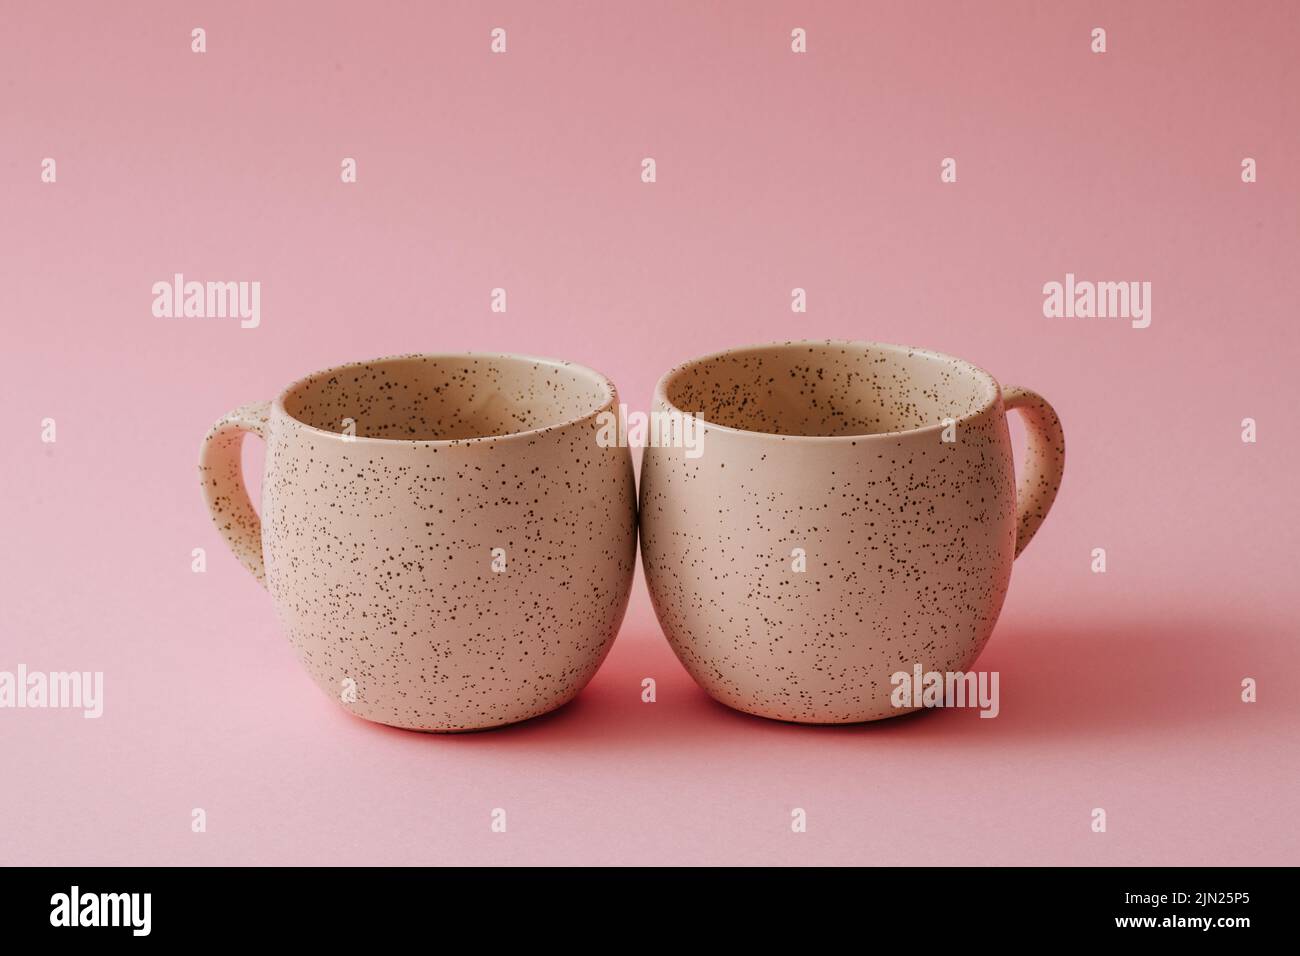 Two porcelain empty cups on a pink background, copy space Stock Photo